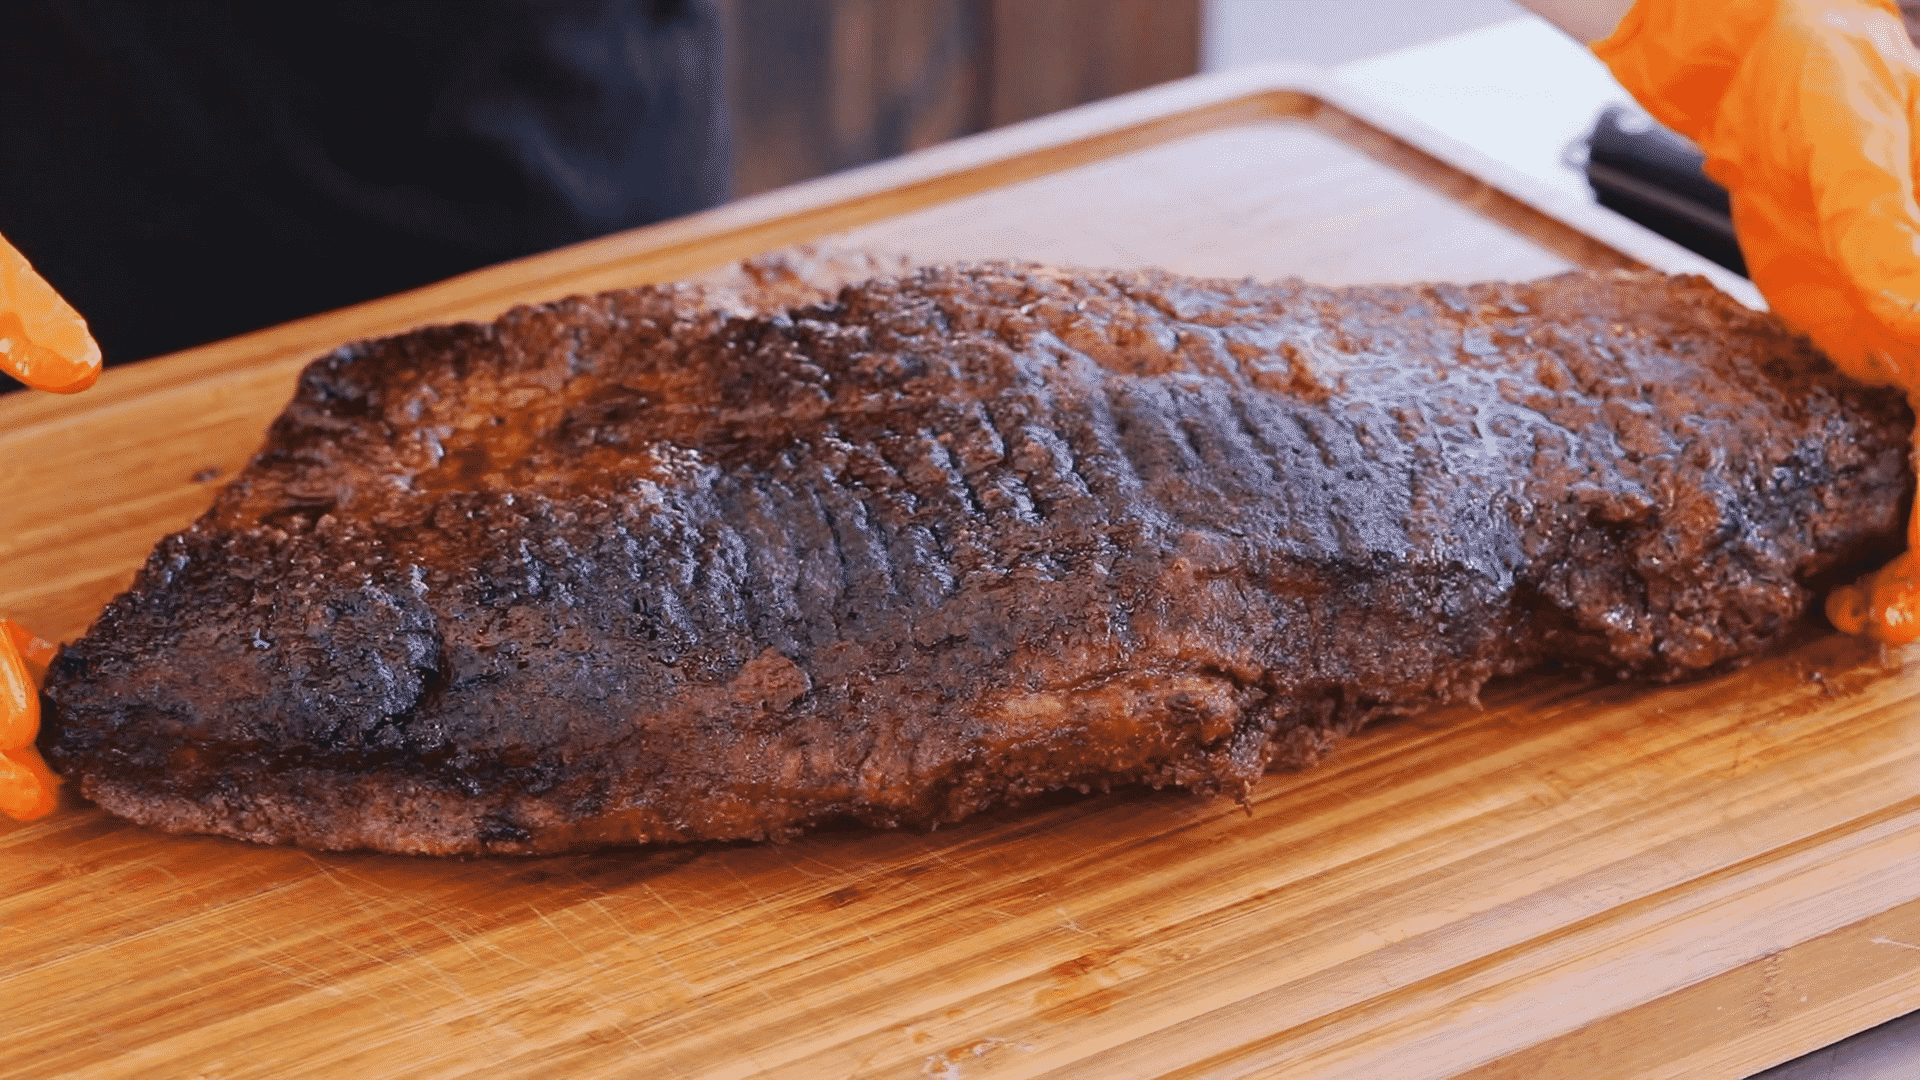 Smoked beef brisket is hot and quick on a wooden cutting board.